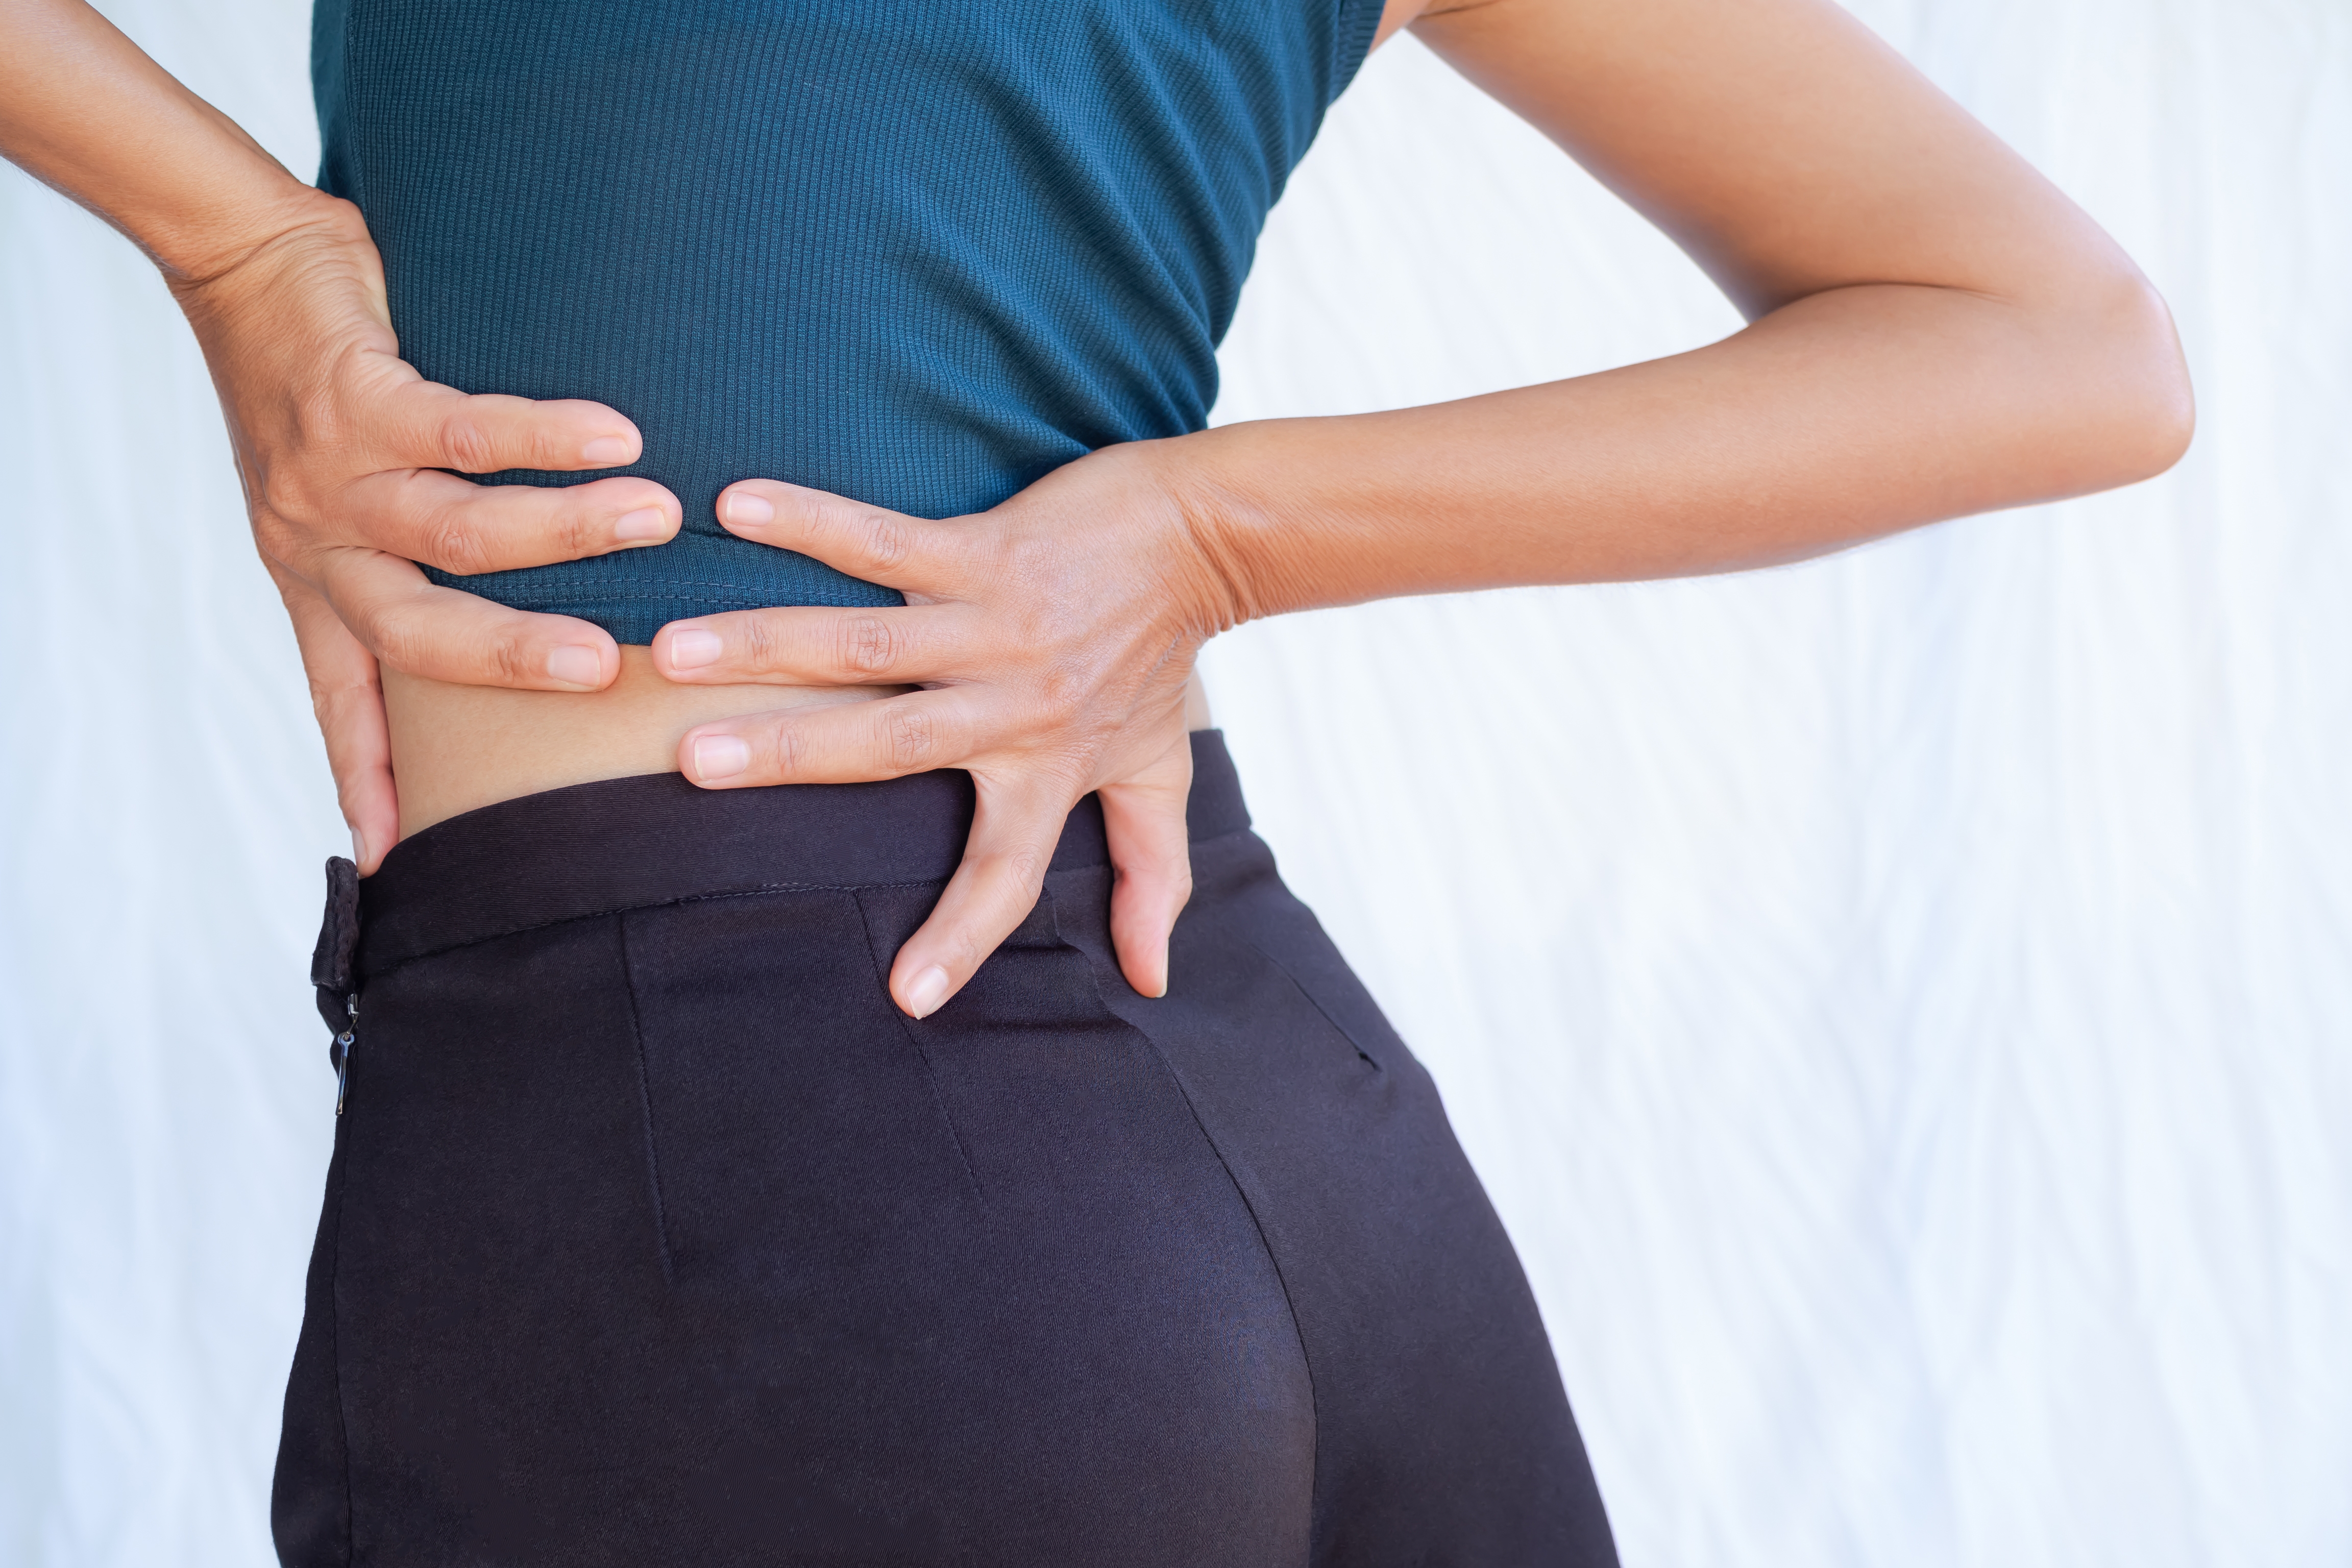 5 Exercises for Low Back Pain and Sciatica